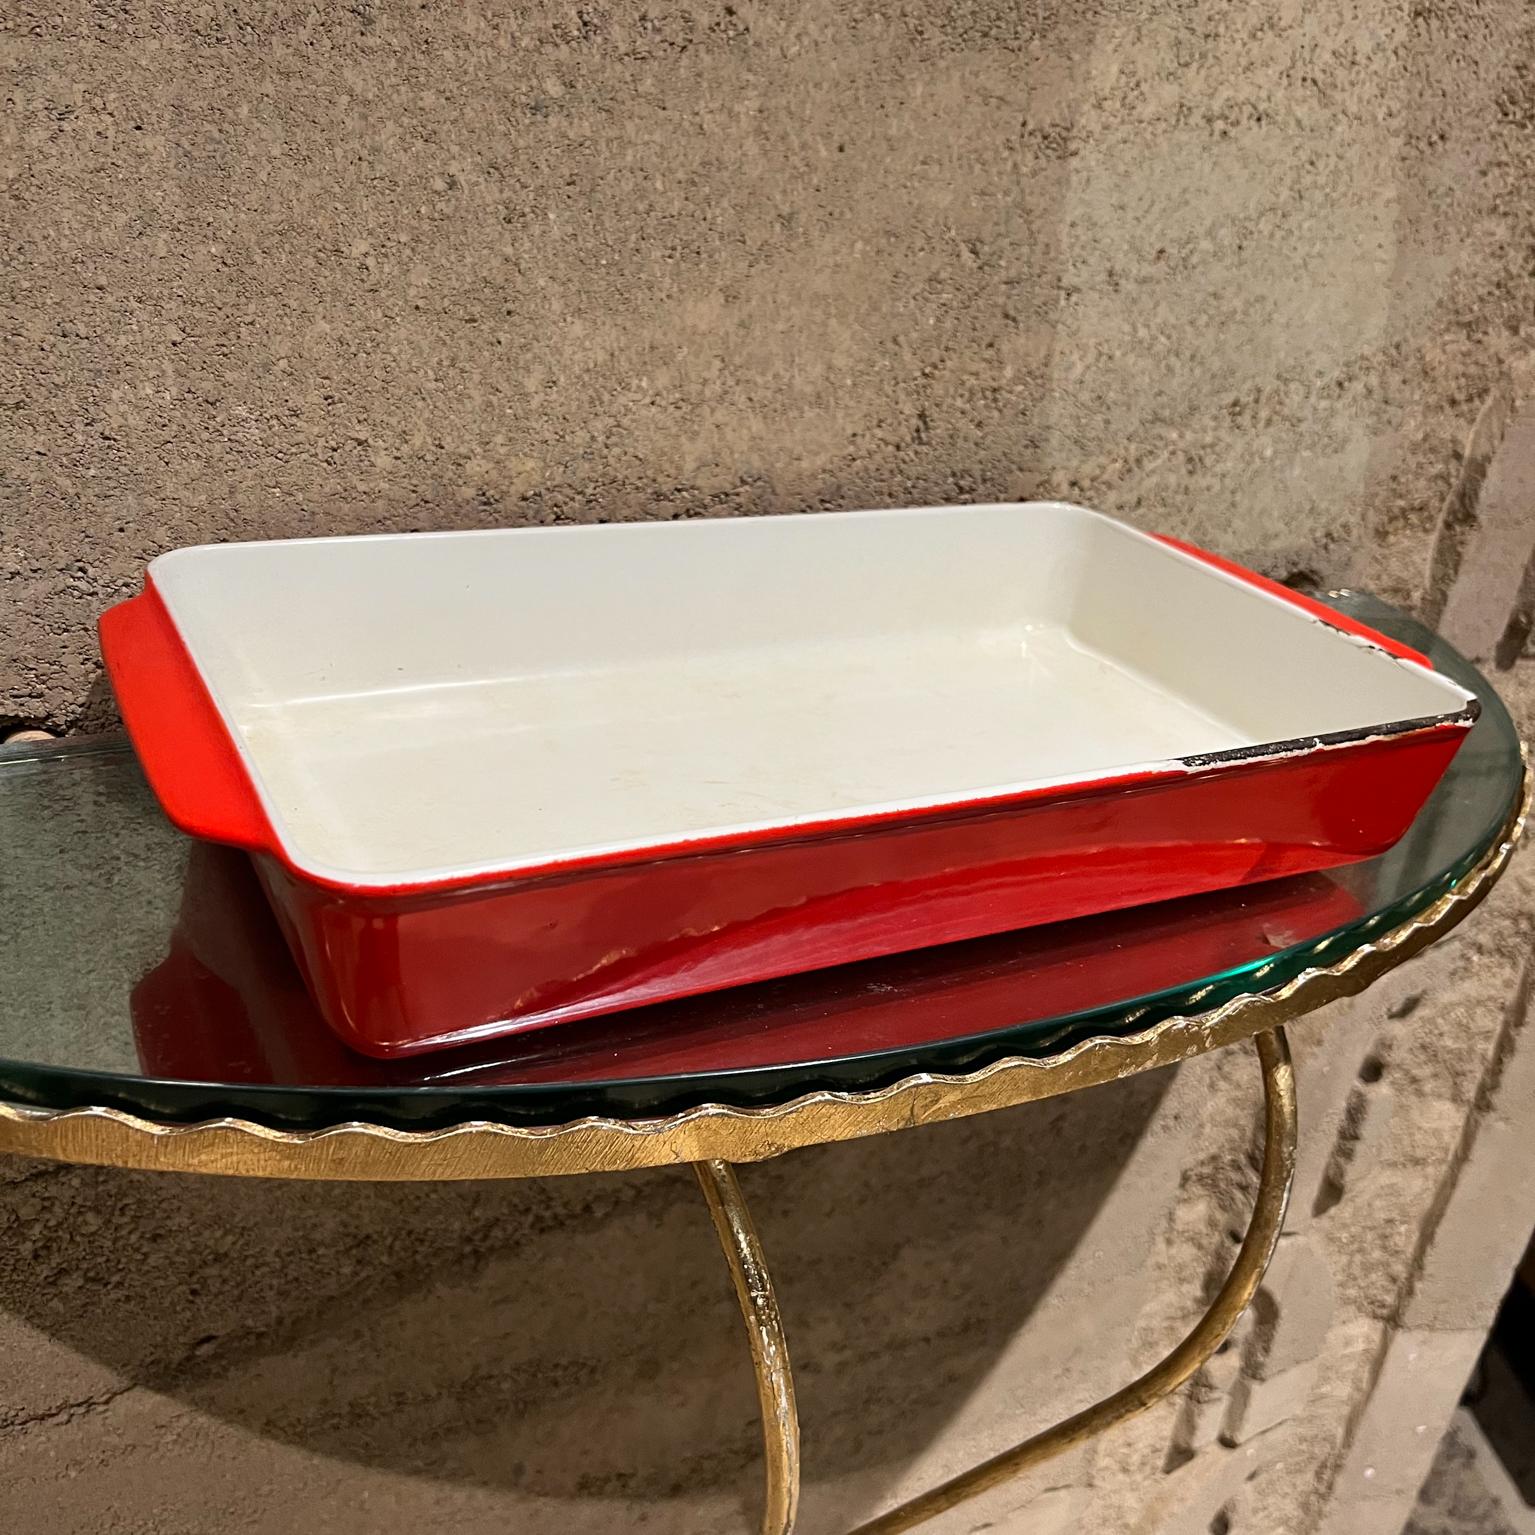 1960s Vintage Red Enamelware Casserole Baking dish Copco Michael Lax Denmark
Cast iron casserole
2.38 tall x 8.63 d x 16 long
Stamped underneath COPCO, Michael LAX.
Some nicks present around the edges.
Preowned unrestored vintage